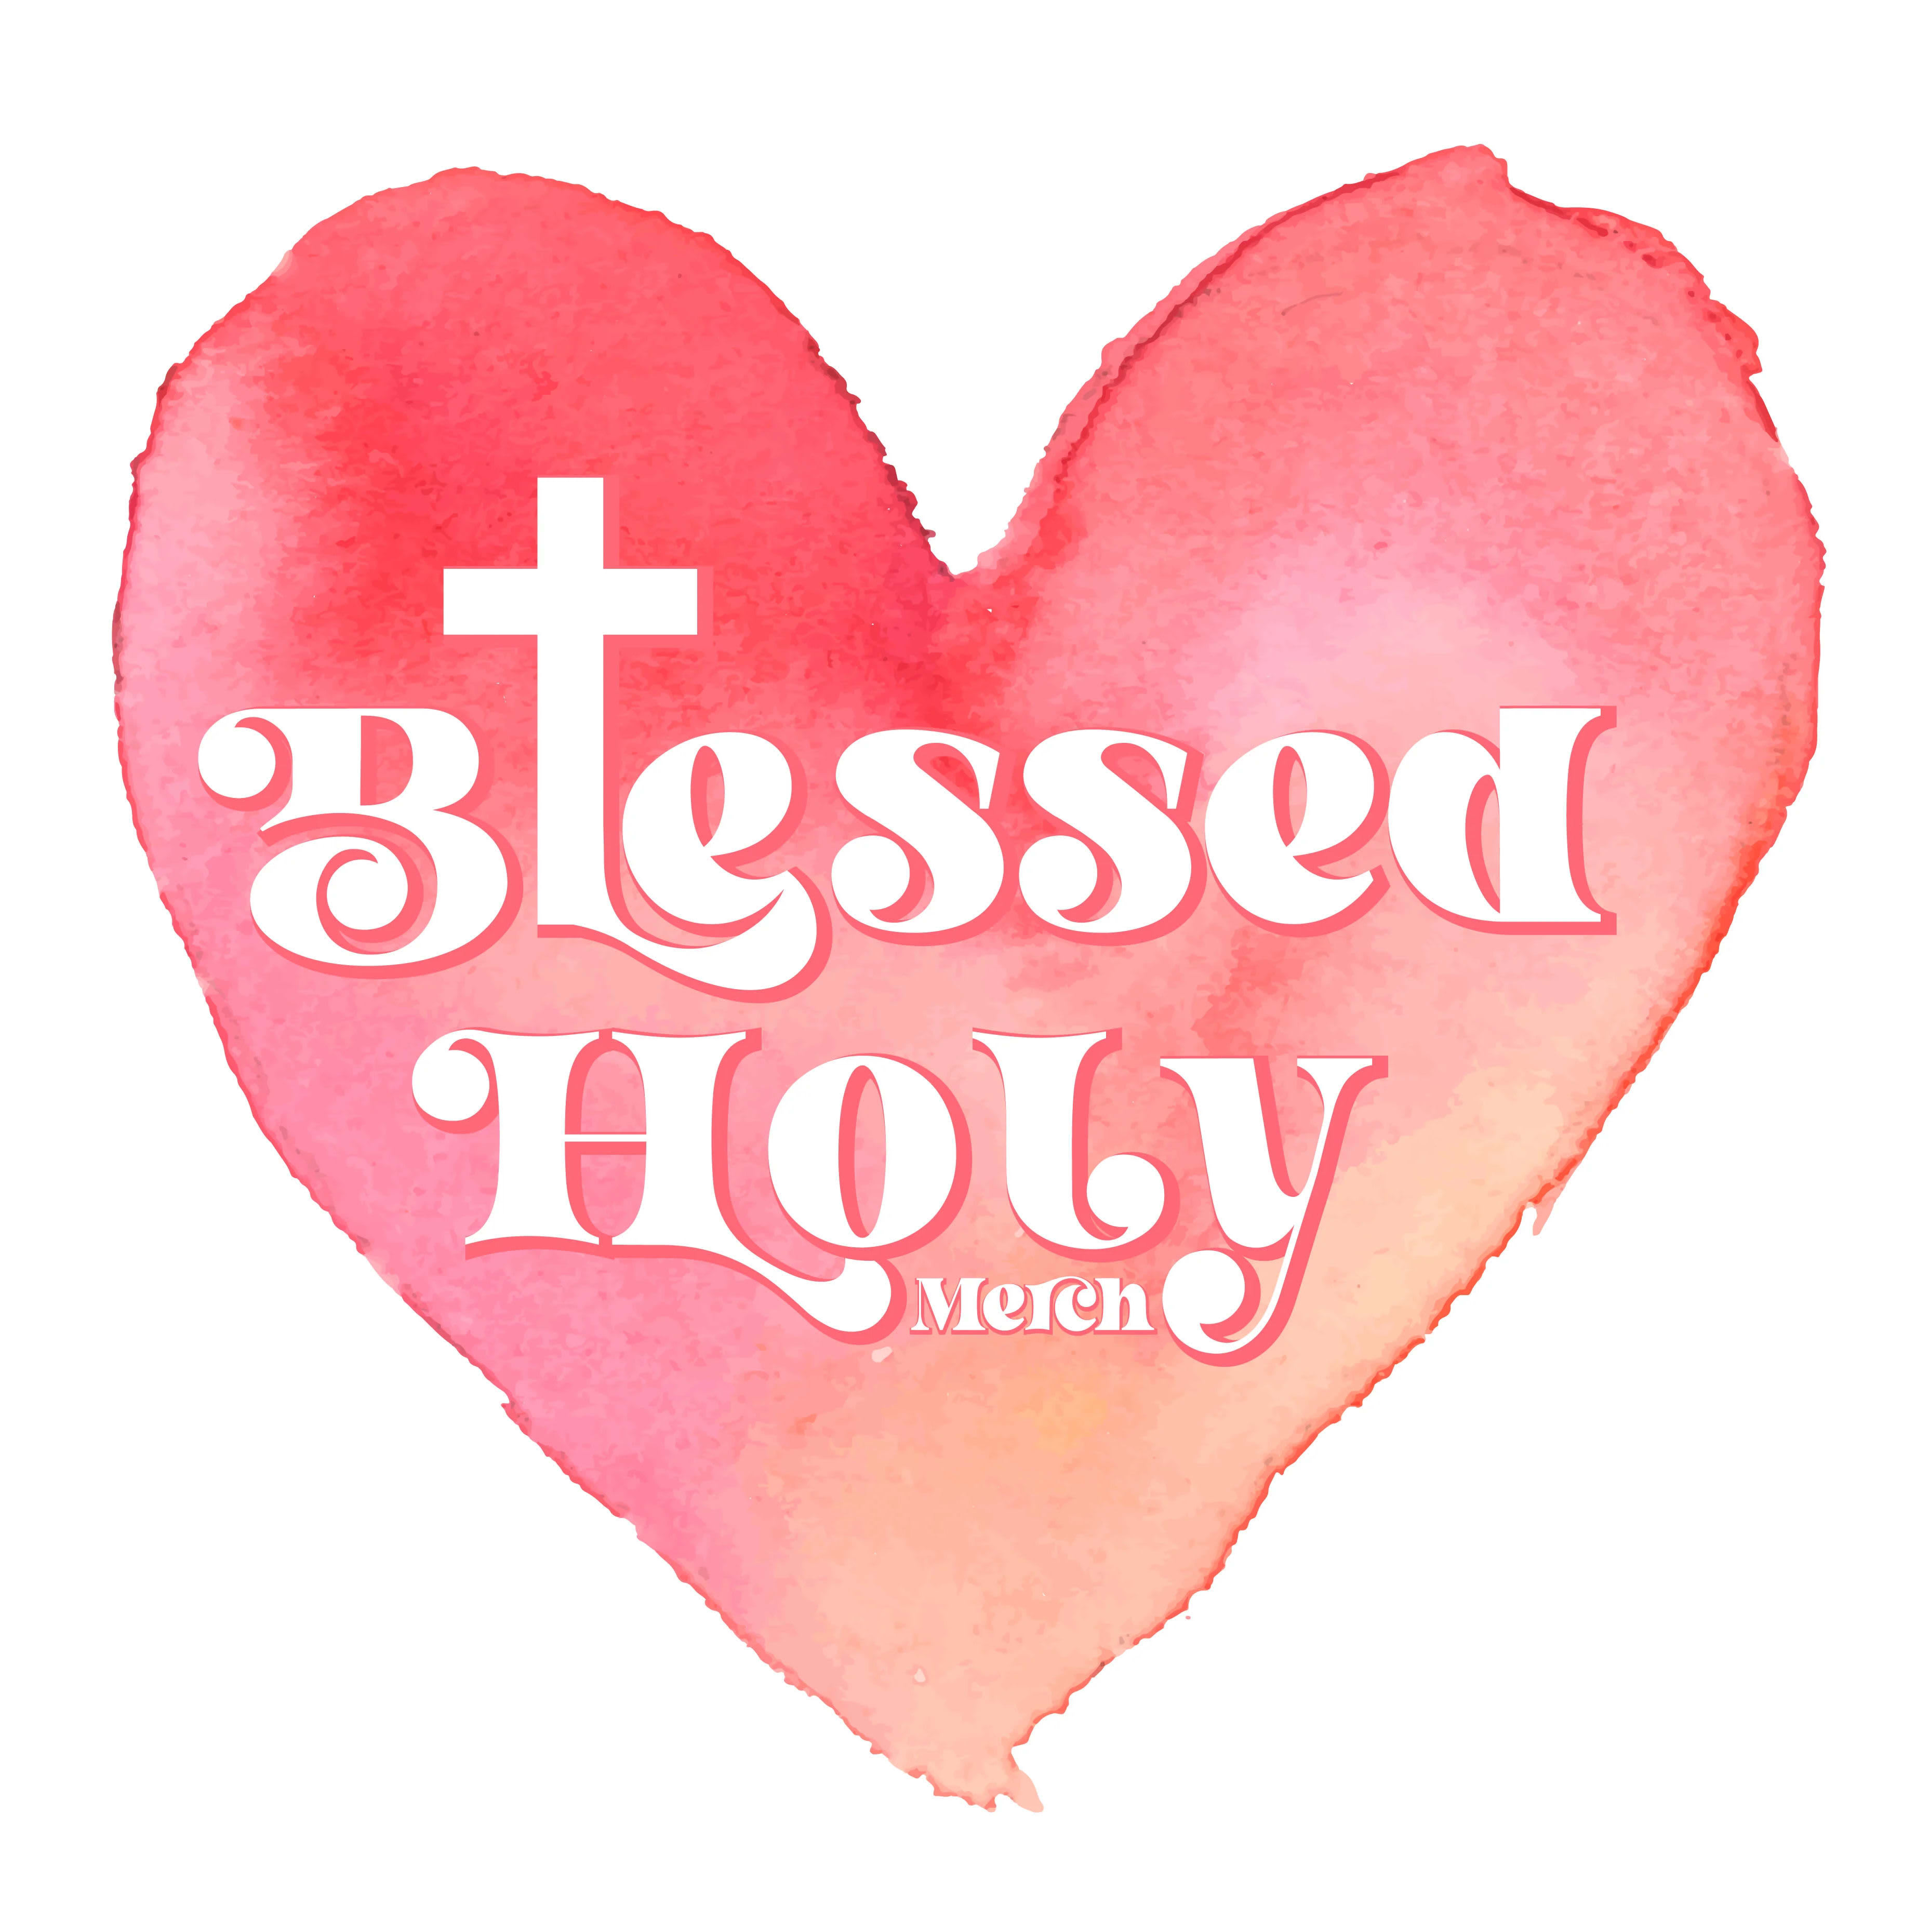 Blessed Holy Merch